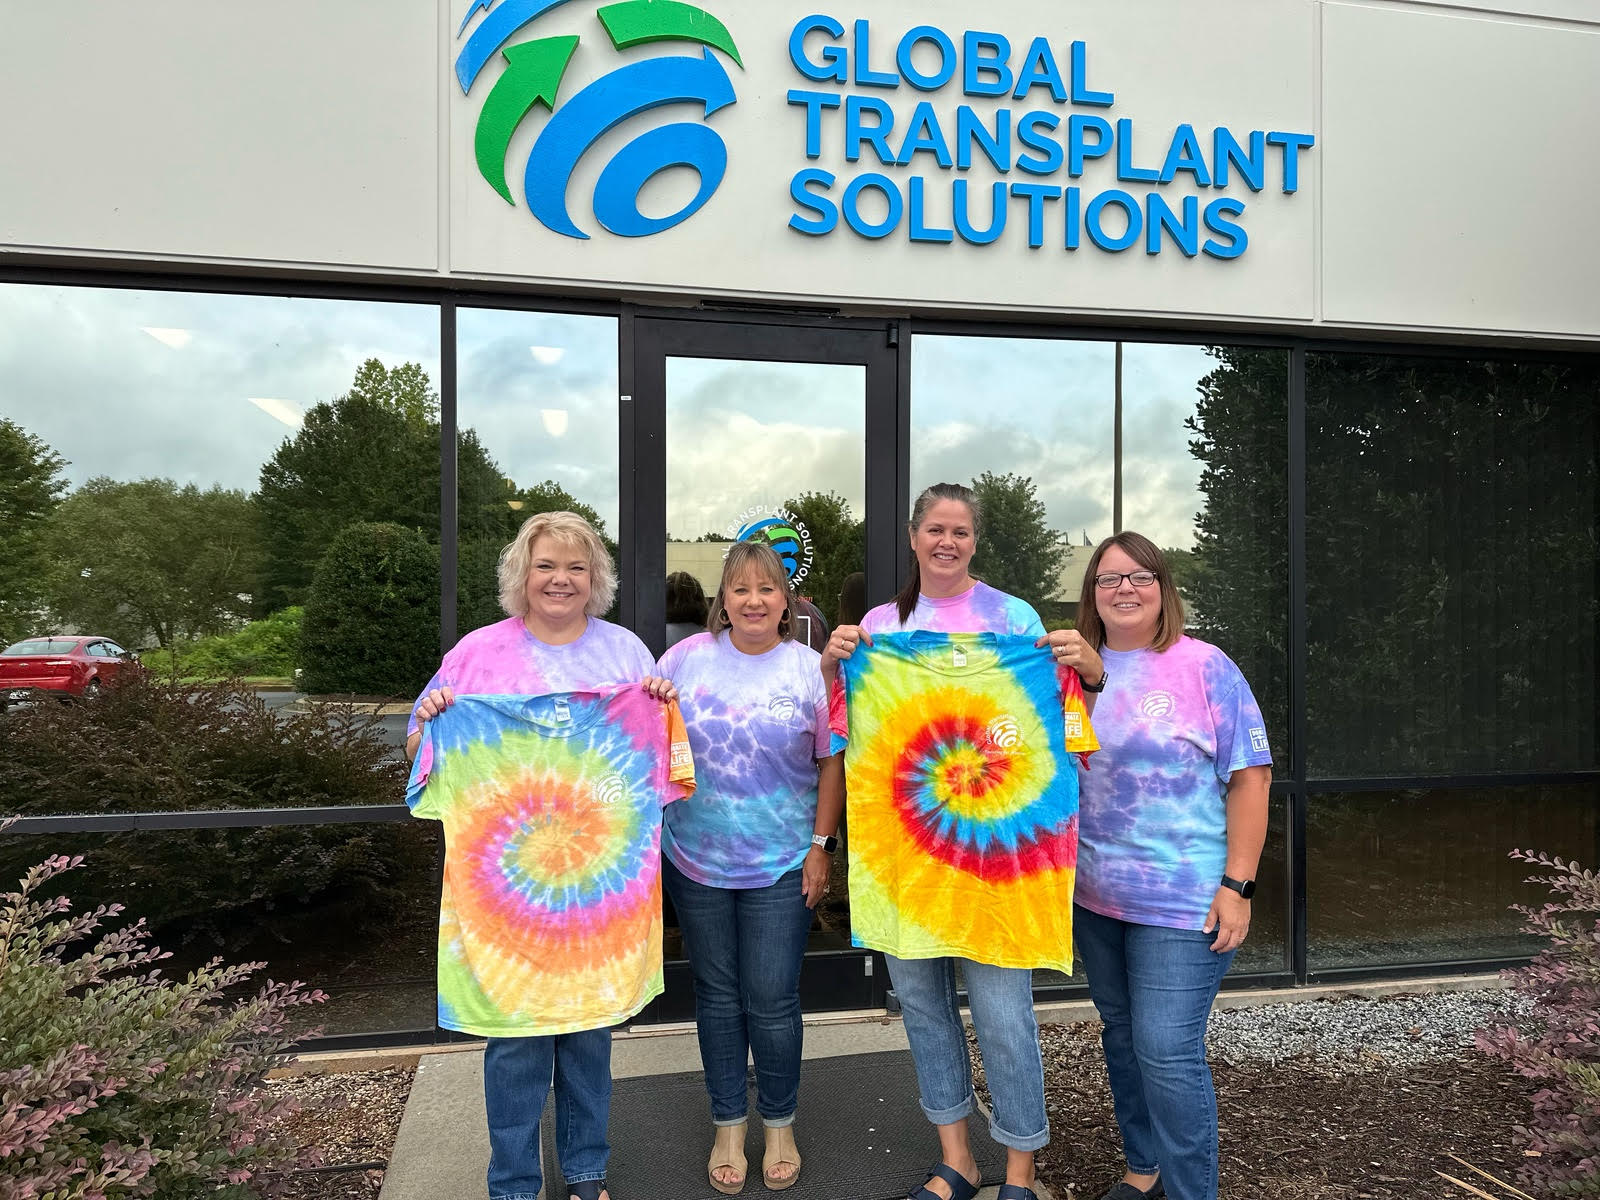 Global Transplant Solutions gets RETRO with Our Newest Shirts!